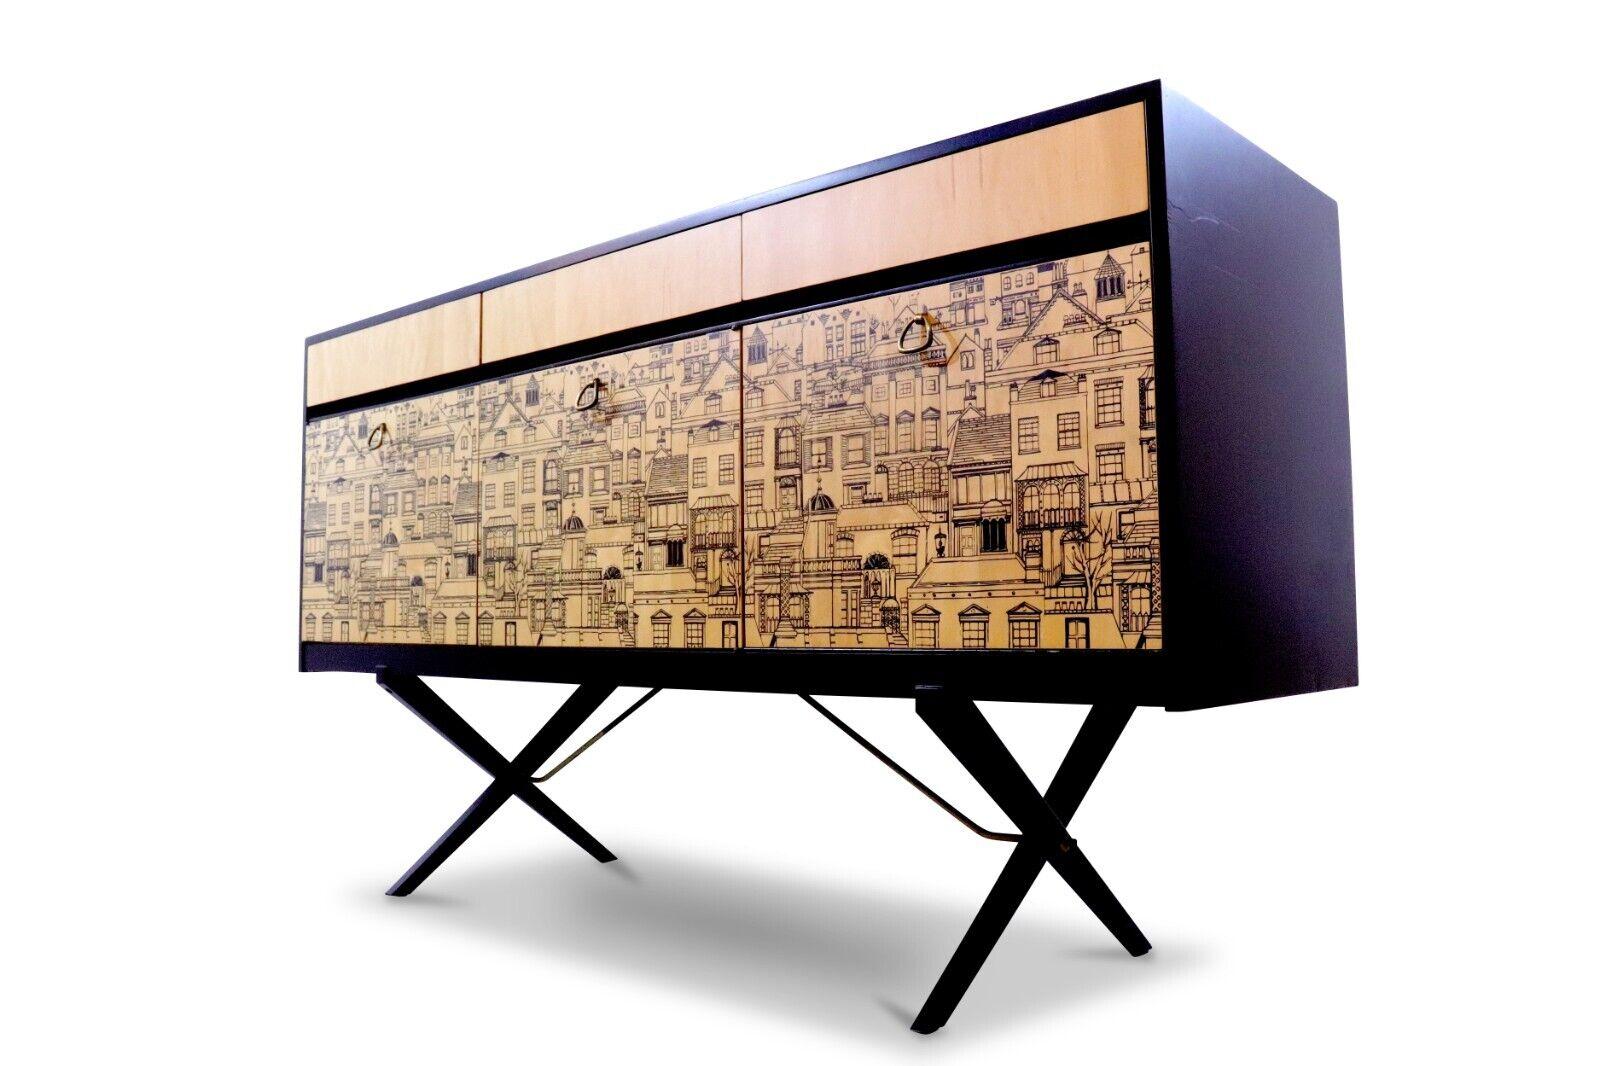 Up-cycled sideboard / cupboards; artwork in the manner of Robert and Dorothy heritage, featuring a whimsical cityscape. This piece follows an iconic style adding a touch of artistry to any interior. The cupboards and drawers offer optimum storage